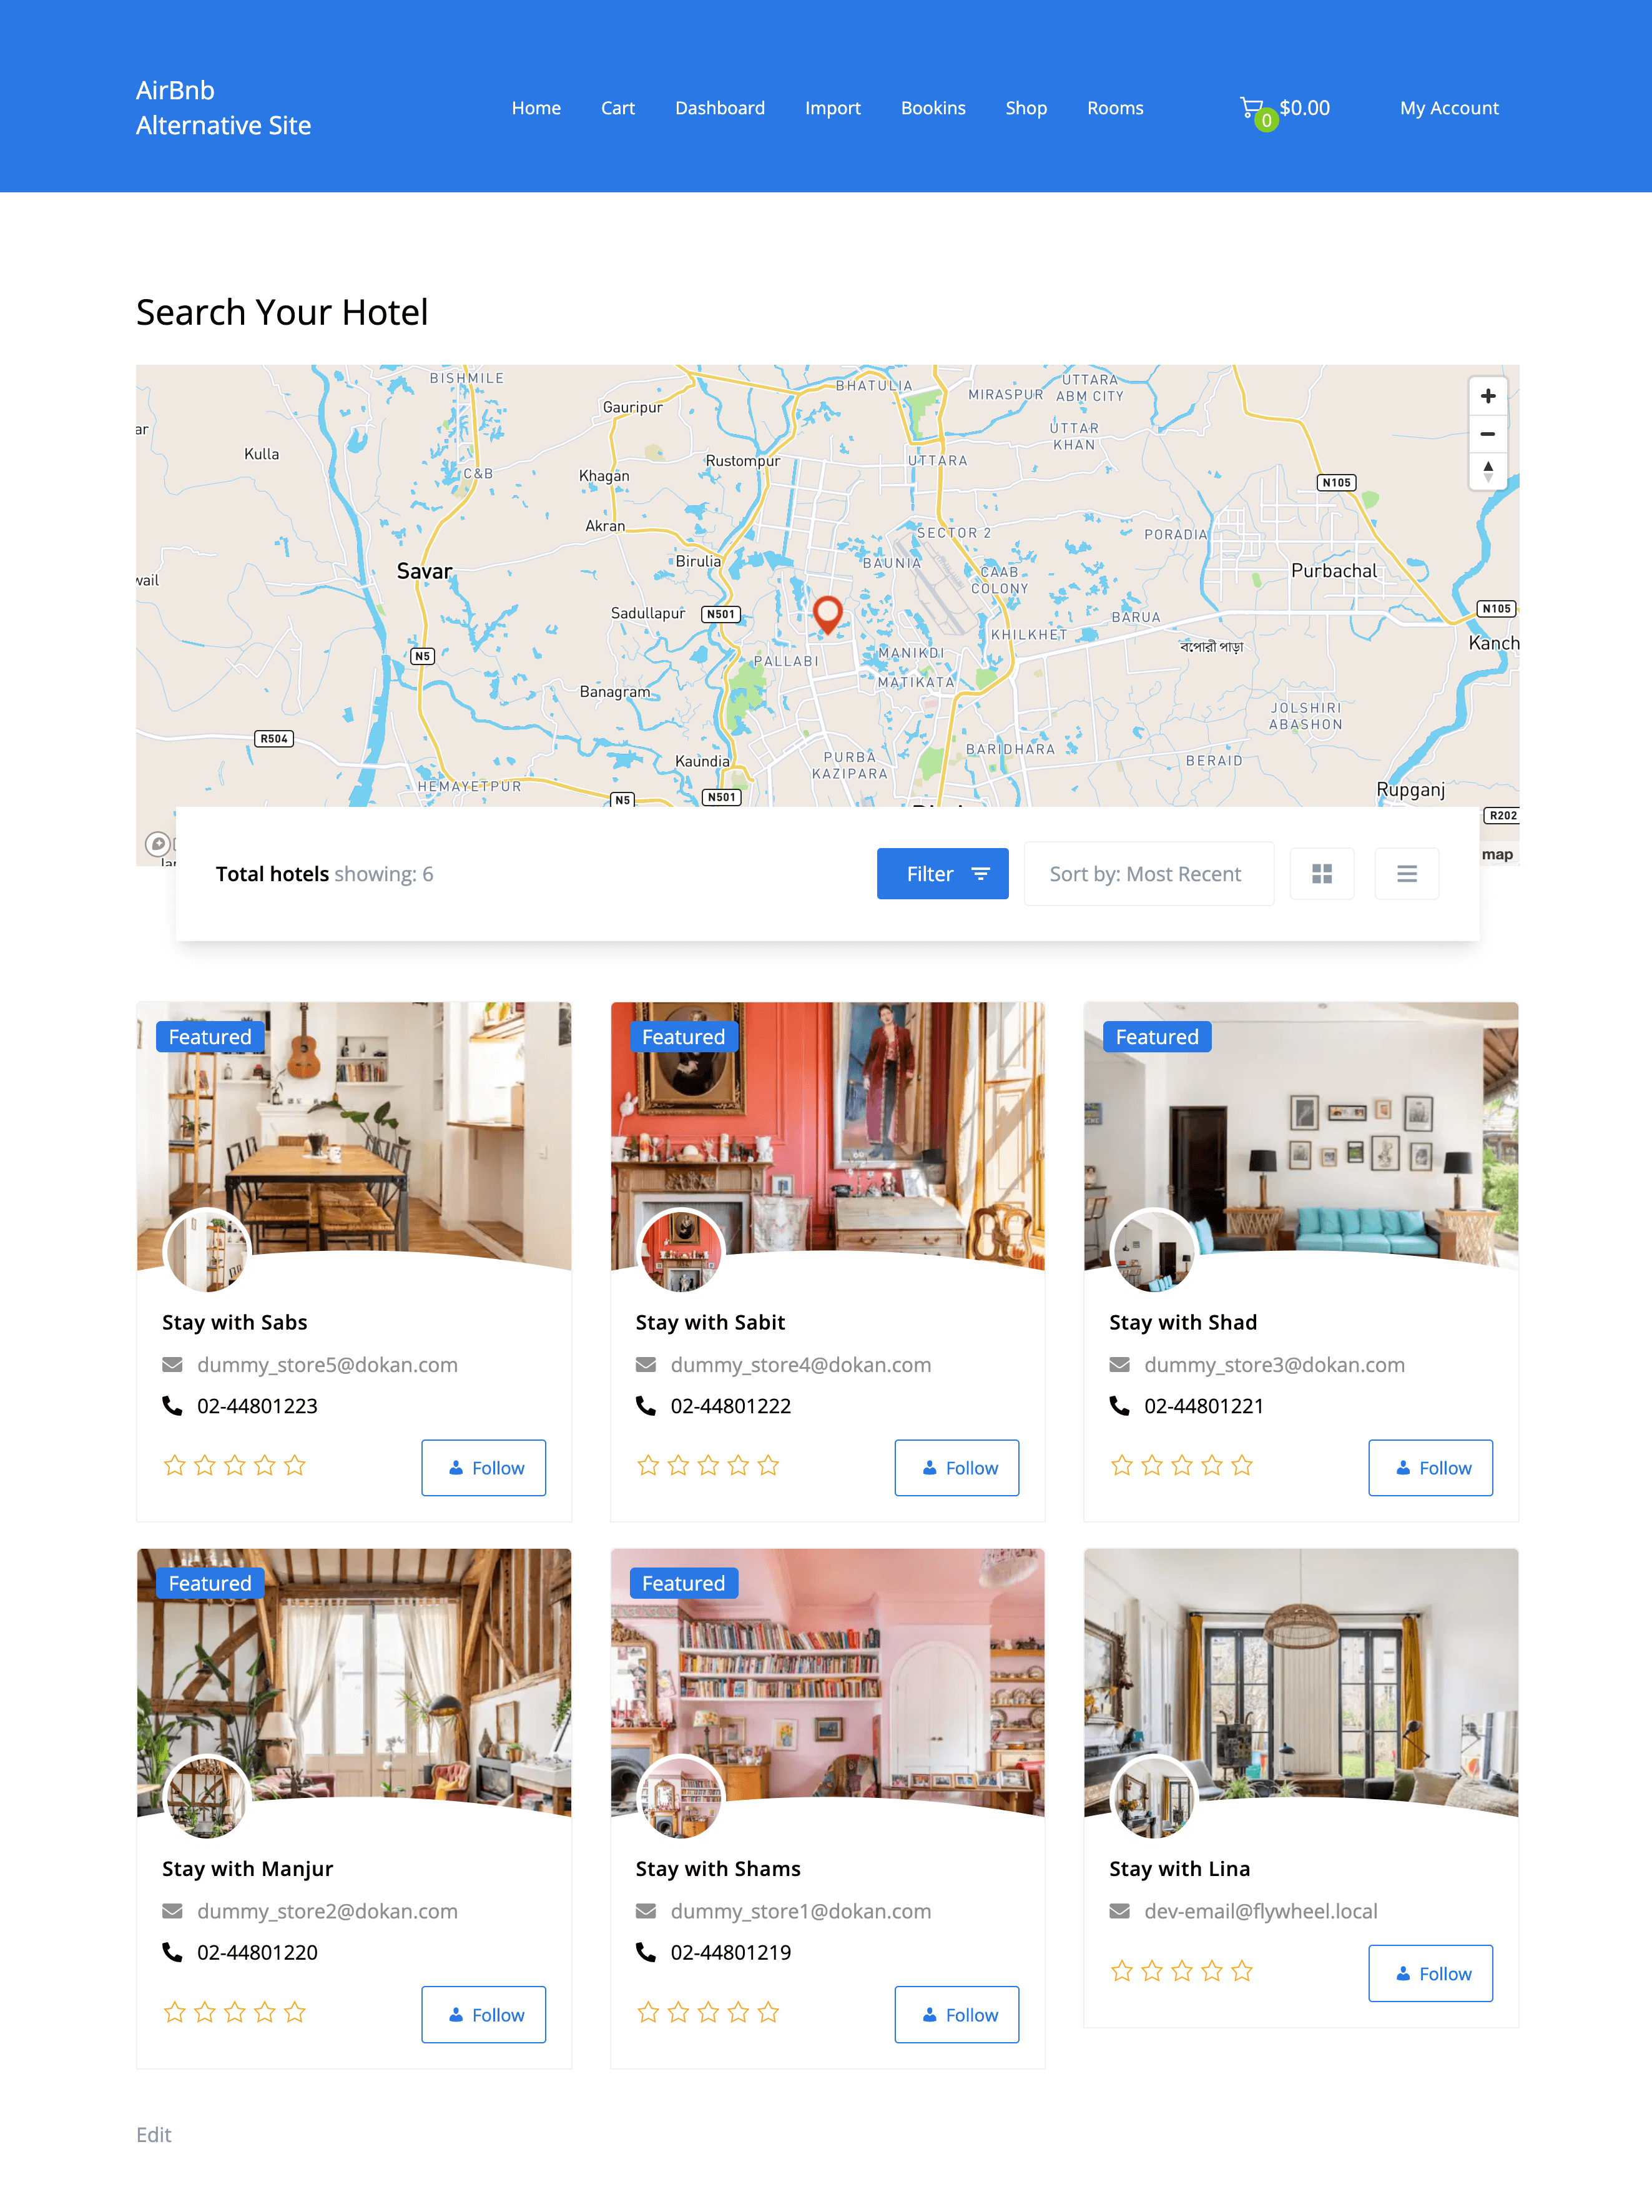 This is a screenshot of Geolocation from the store listing page